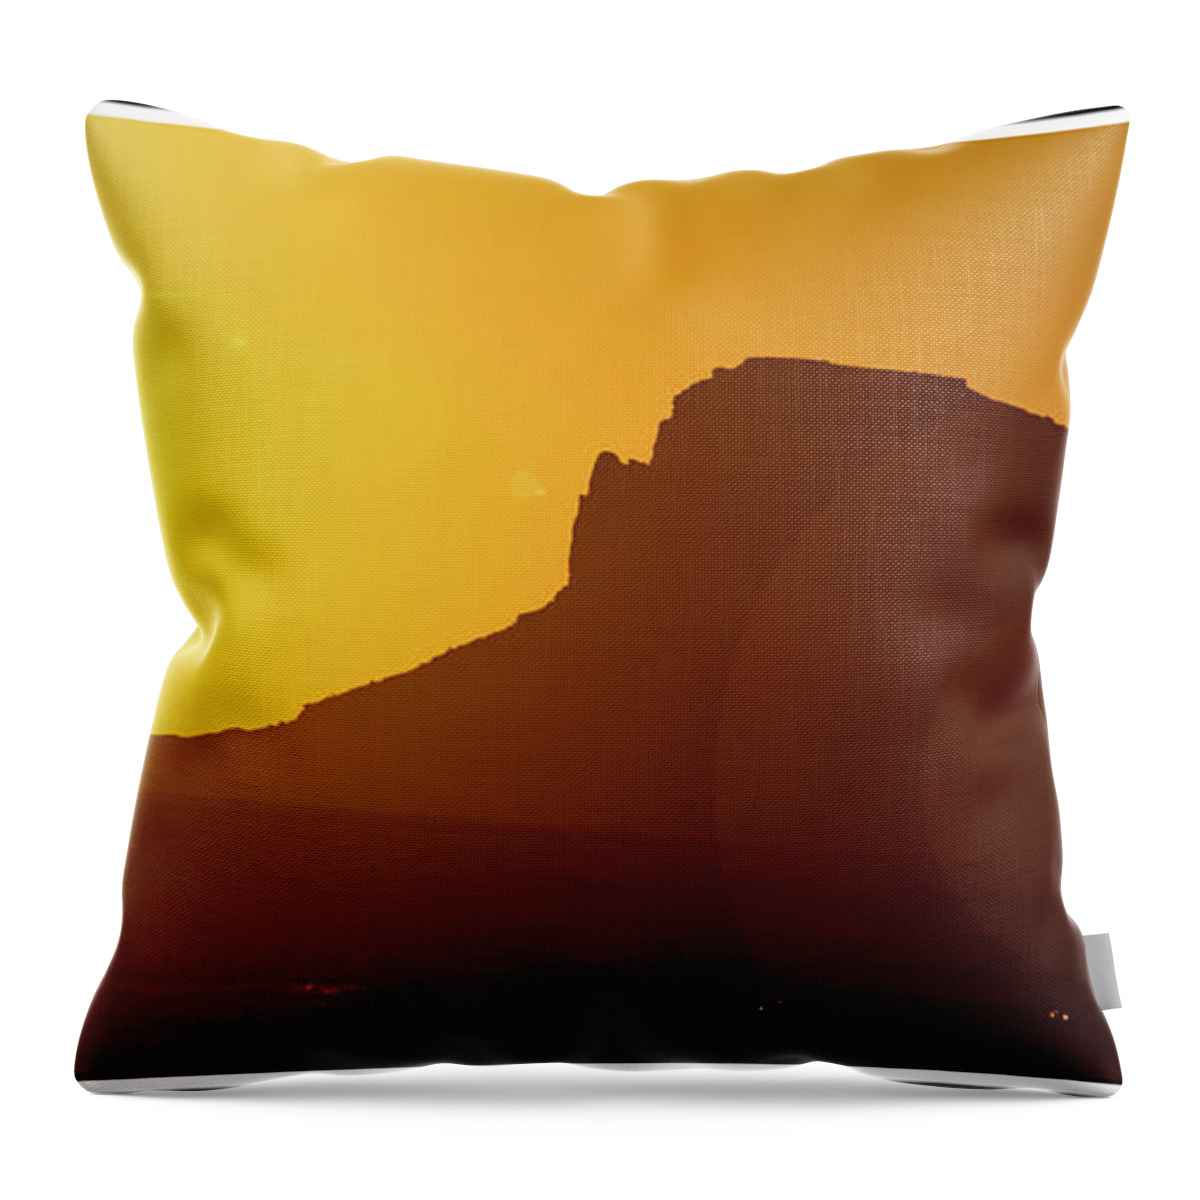 Colorado Plateau Throw Pillow featuring the photograph Monument Valley Sunrise by A Macarthur Gurmankin